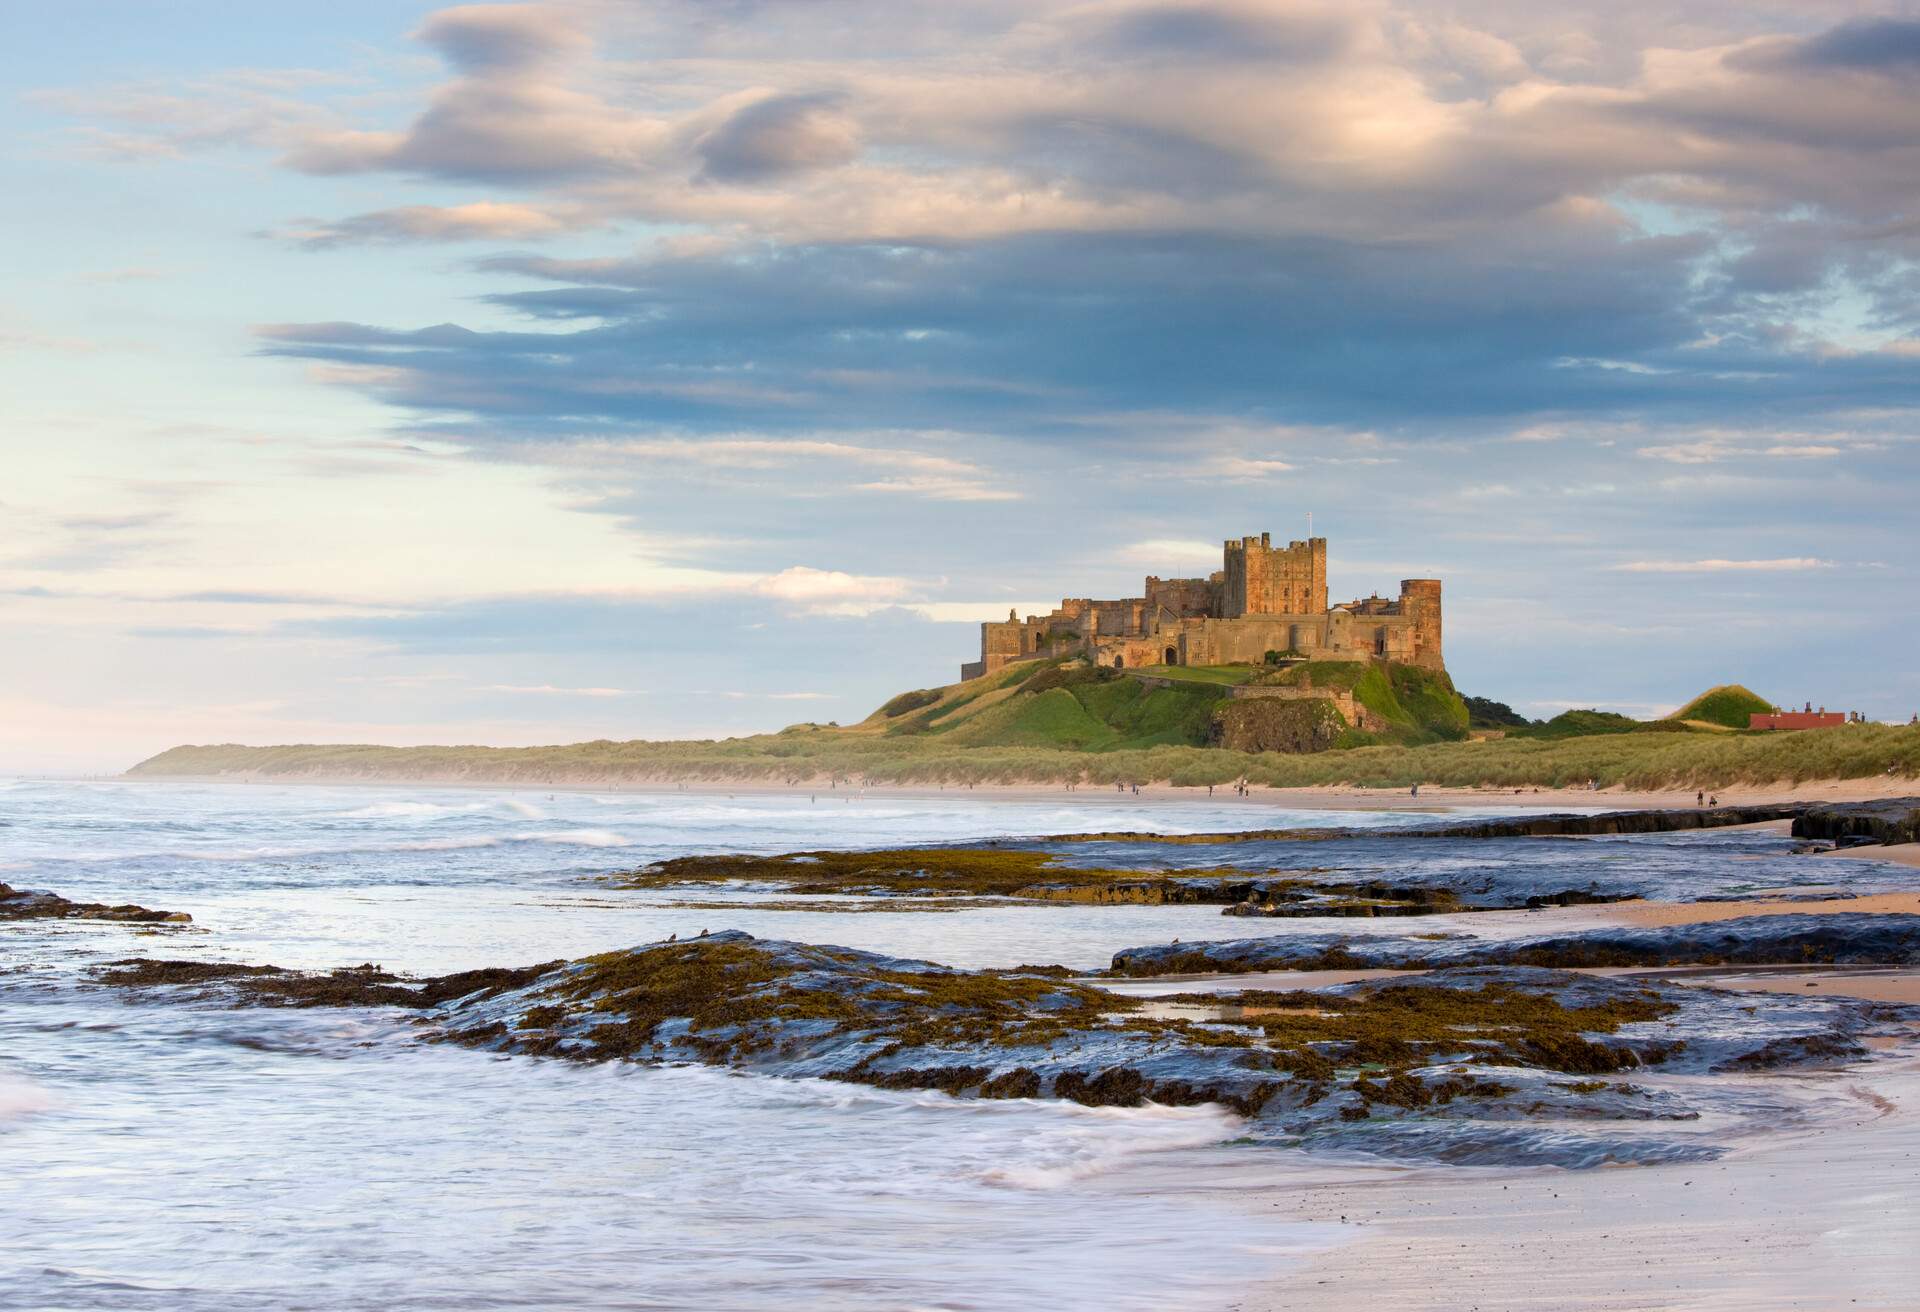 A vast castle crowned on a hill alongside a rugged coast surrounded by the big waves of the sea.